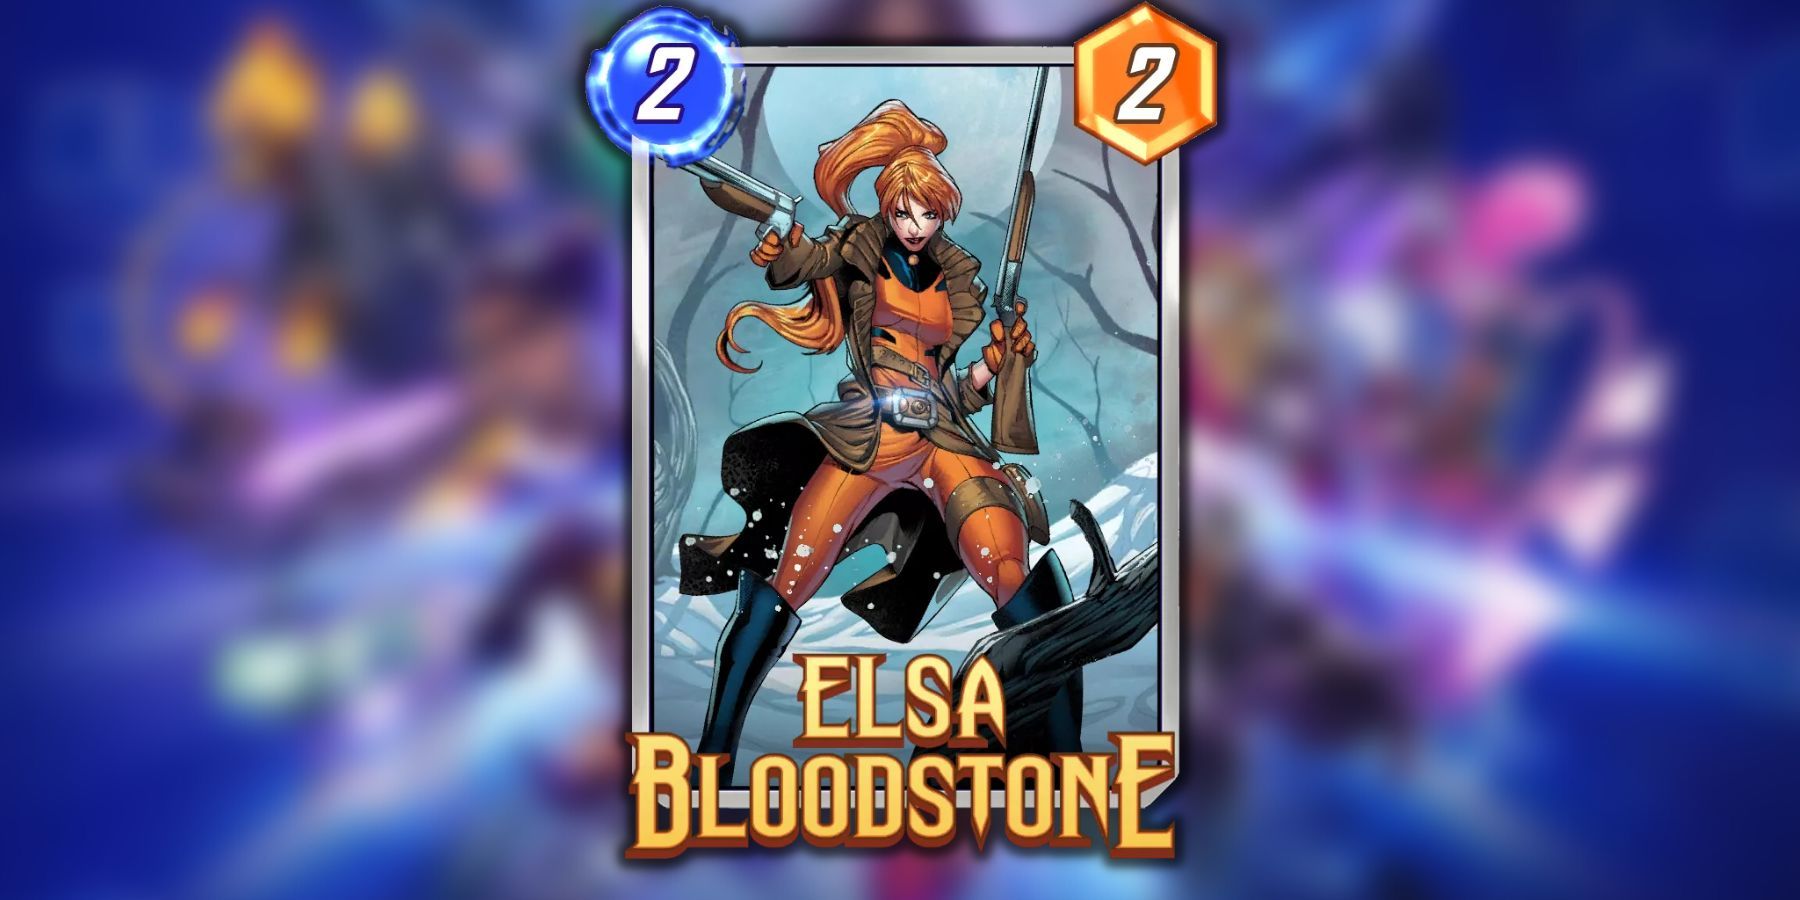 image showing the elsa bloodstone card in marvel snap.